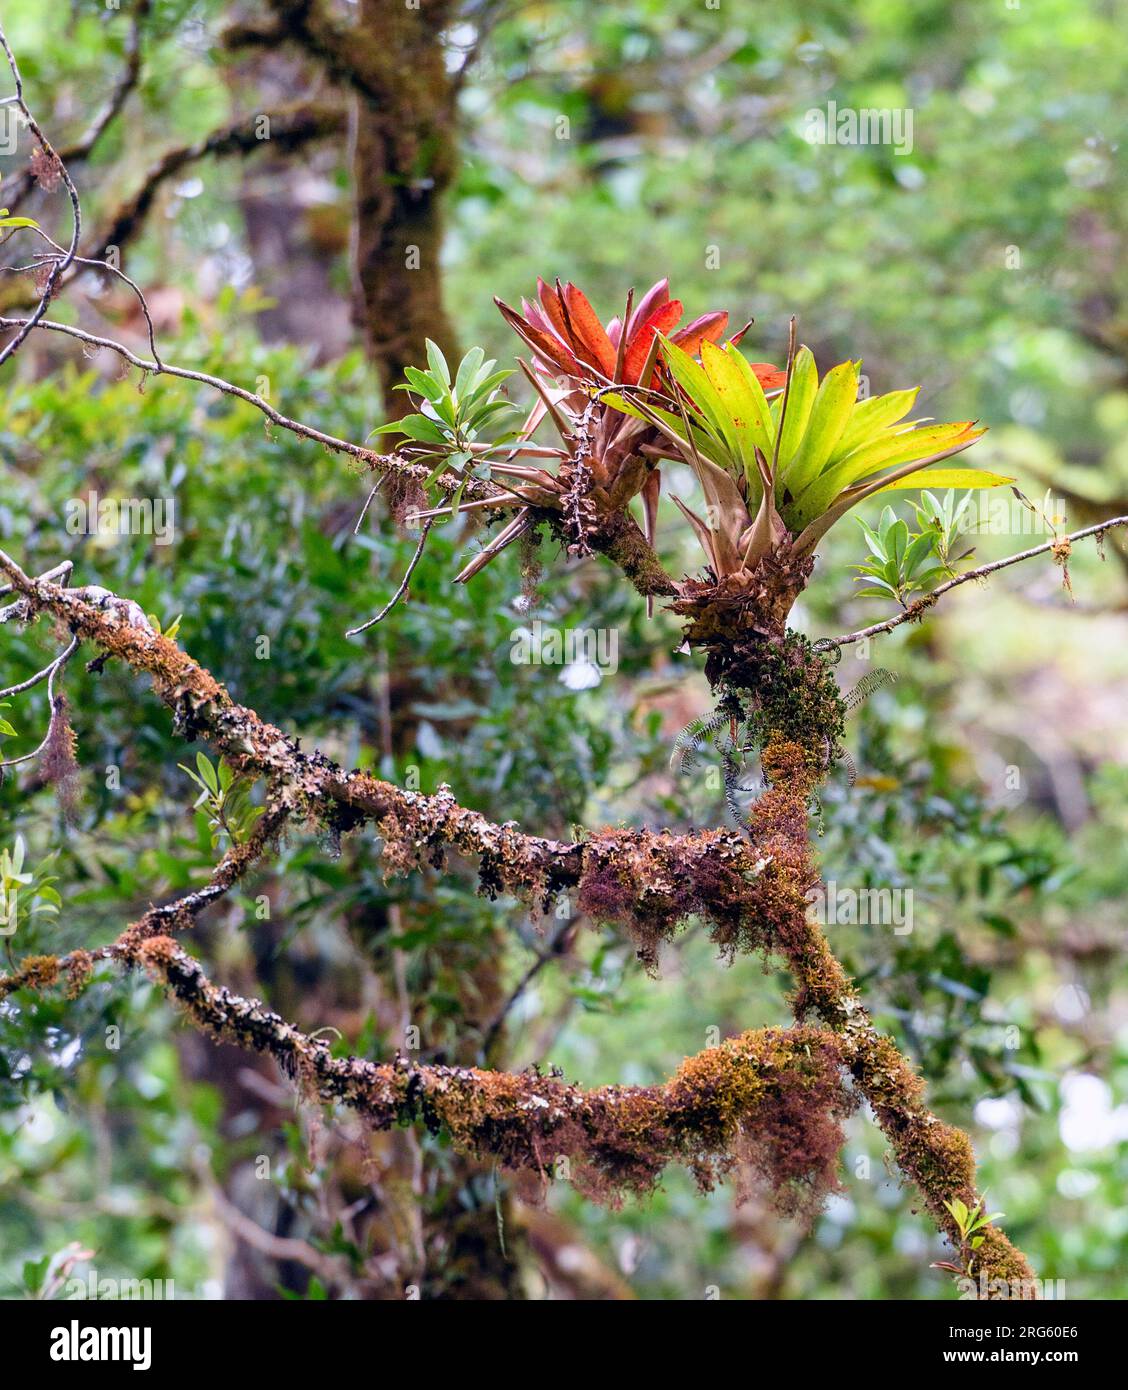 Beromeliads and mosses growin in the cloud forest of San Gerardo de Dota, Costa Rica, at about 2400 meters elevation. Stock Photo